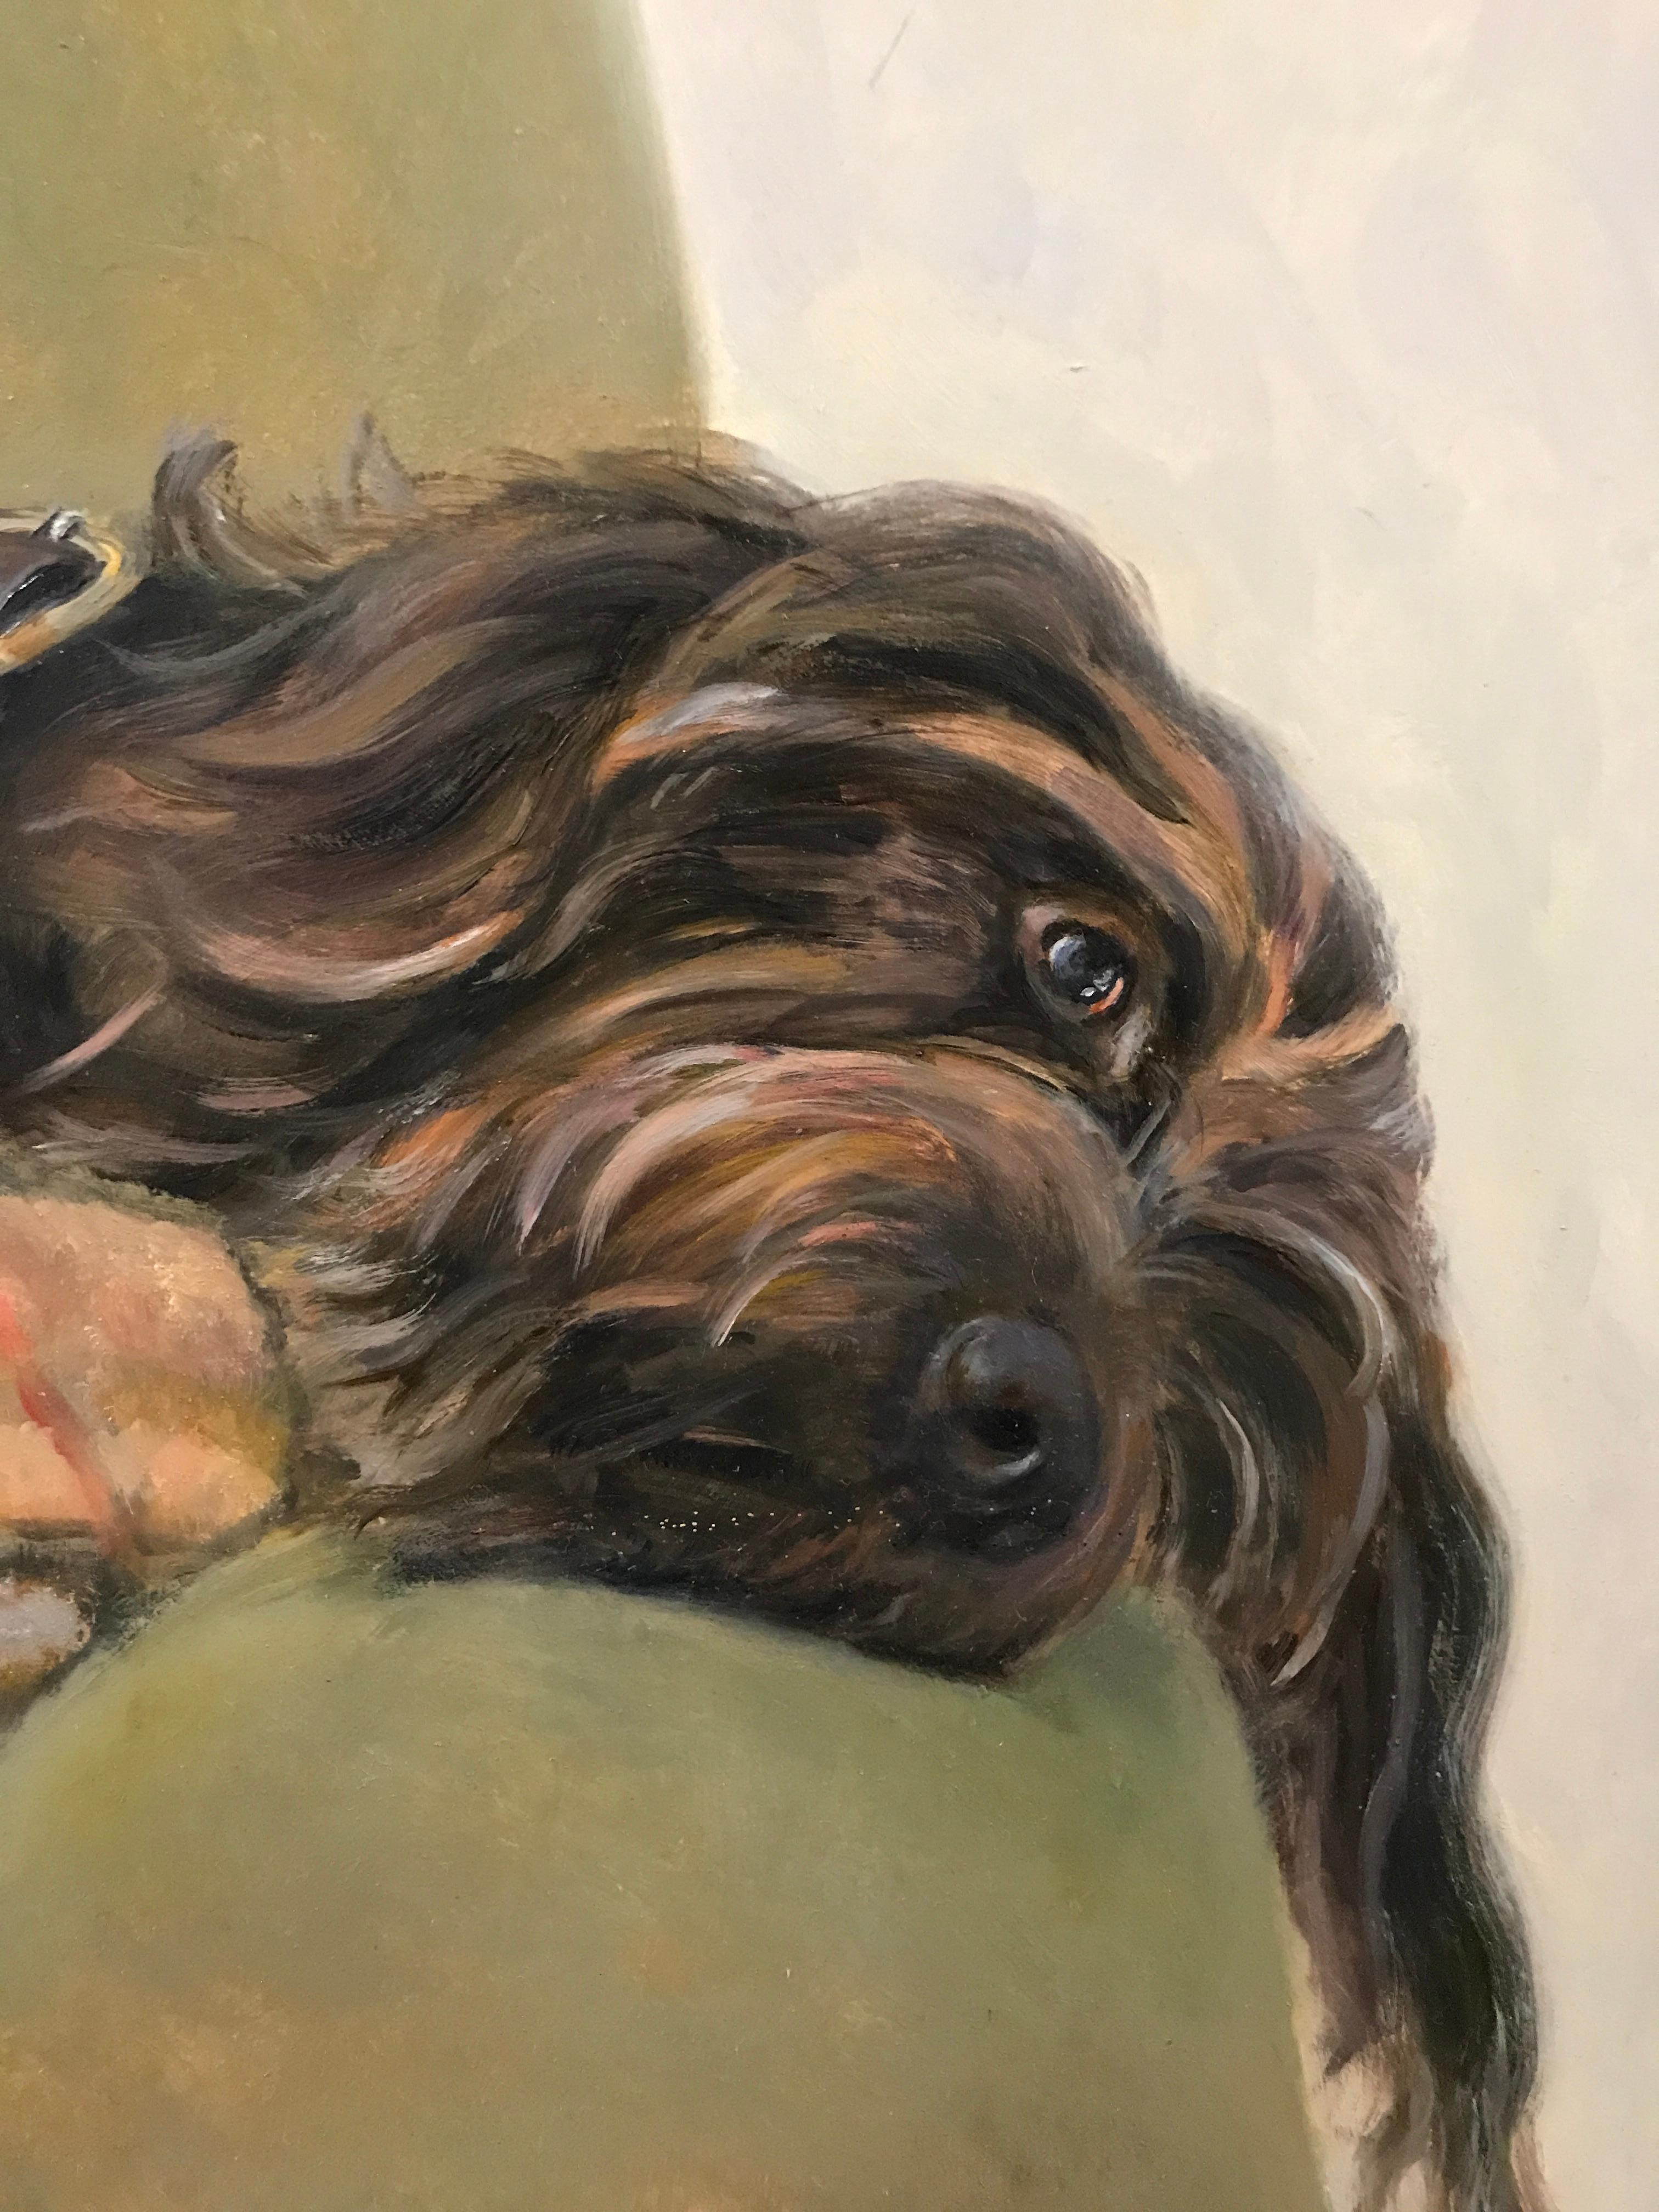 Wirehaired Griffon dog lounging on a sofa  'A Penny for Your Thoughts' intrigues - Painting by Beth Carlson